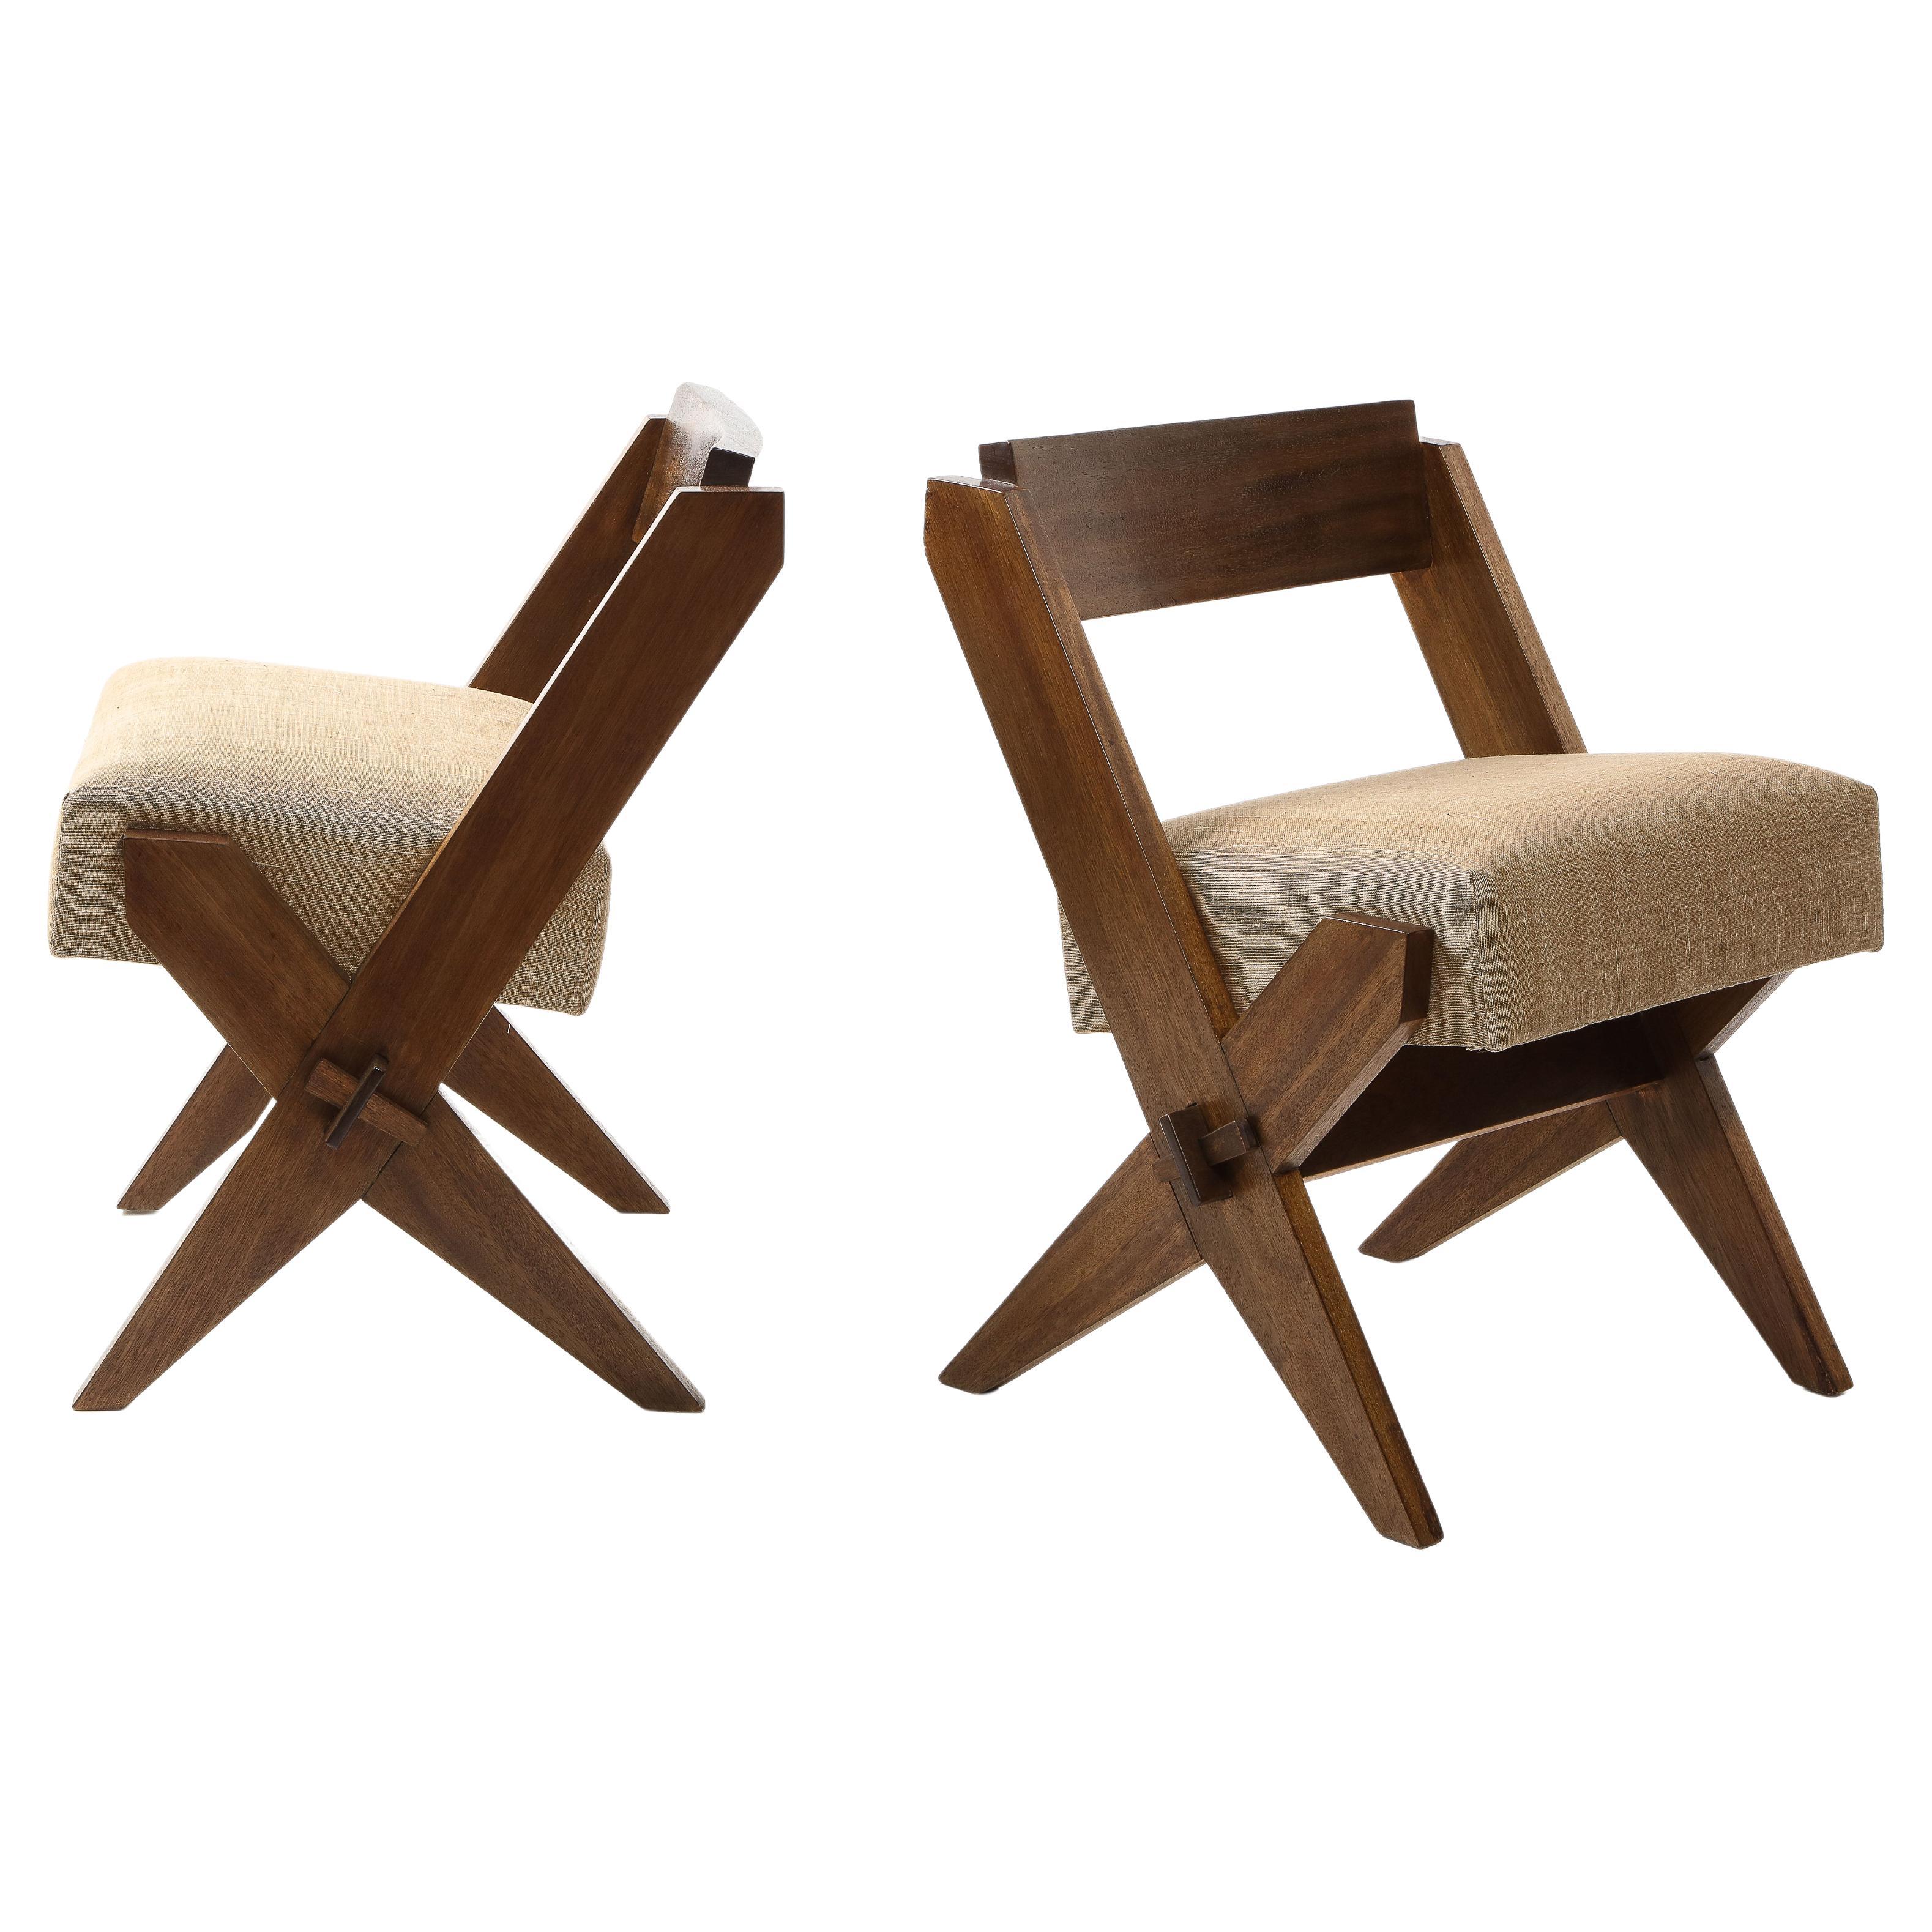 Pair of Reconstruction Small Solid Wood Scissor Leg Chairs, France 1950's For Sale